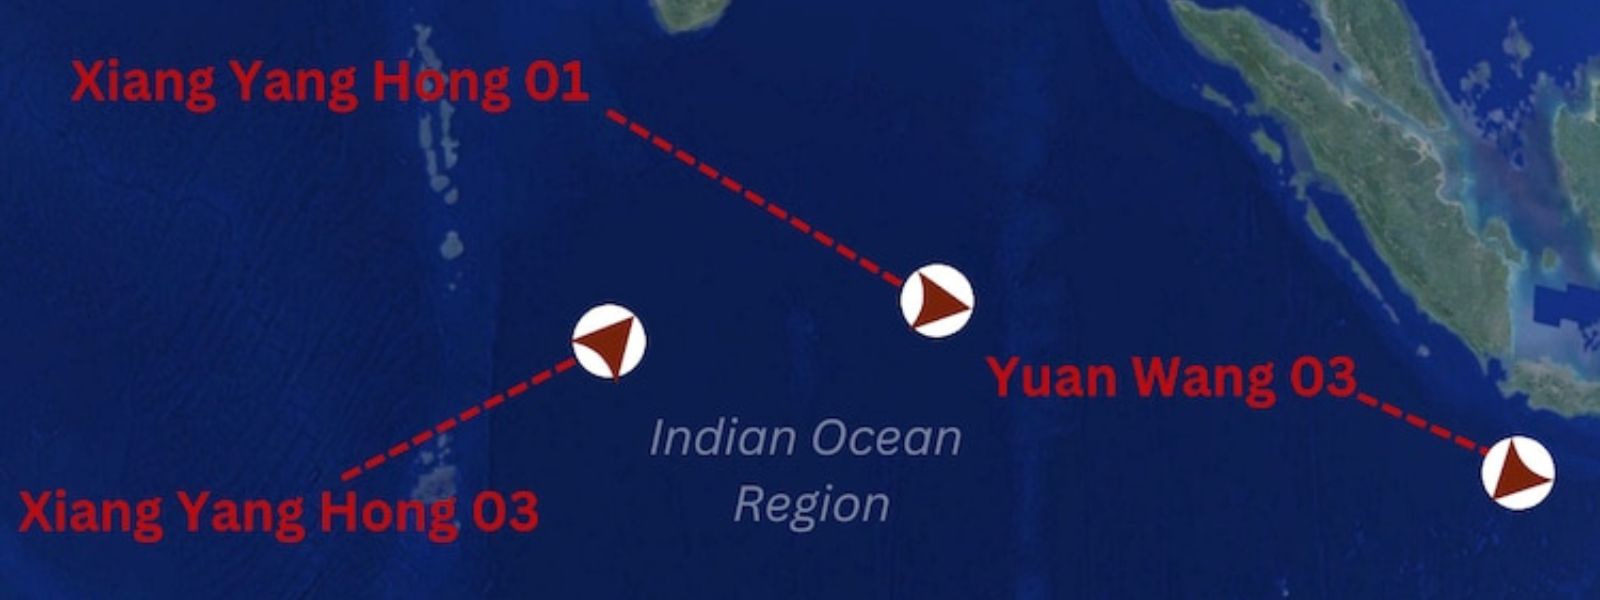 Four Chinese Research Ships In Indian Ocean